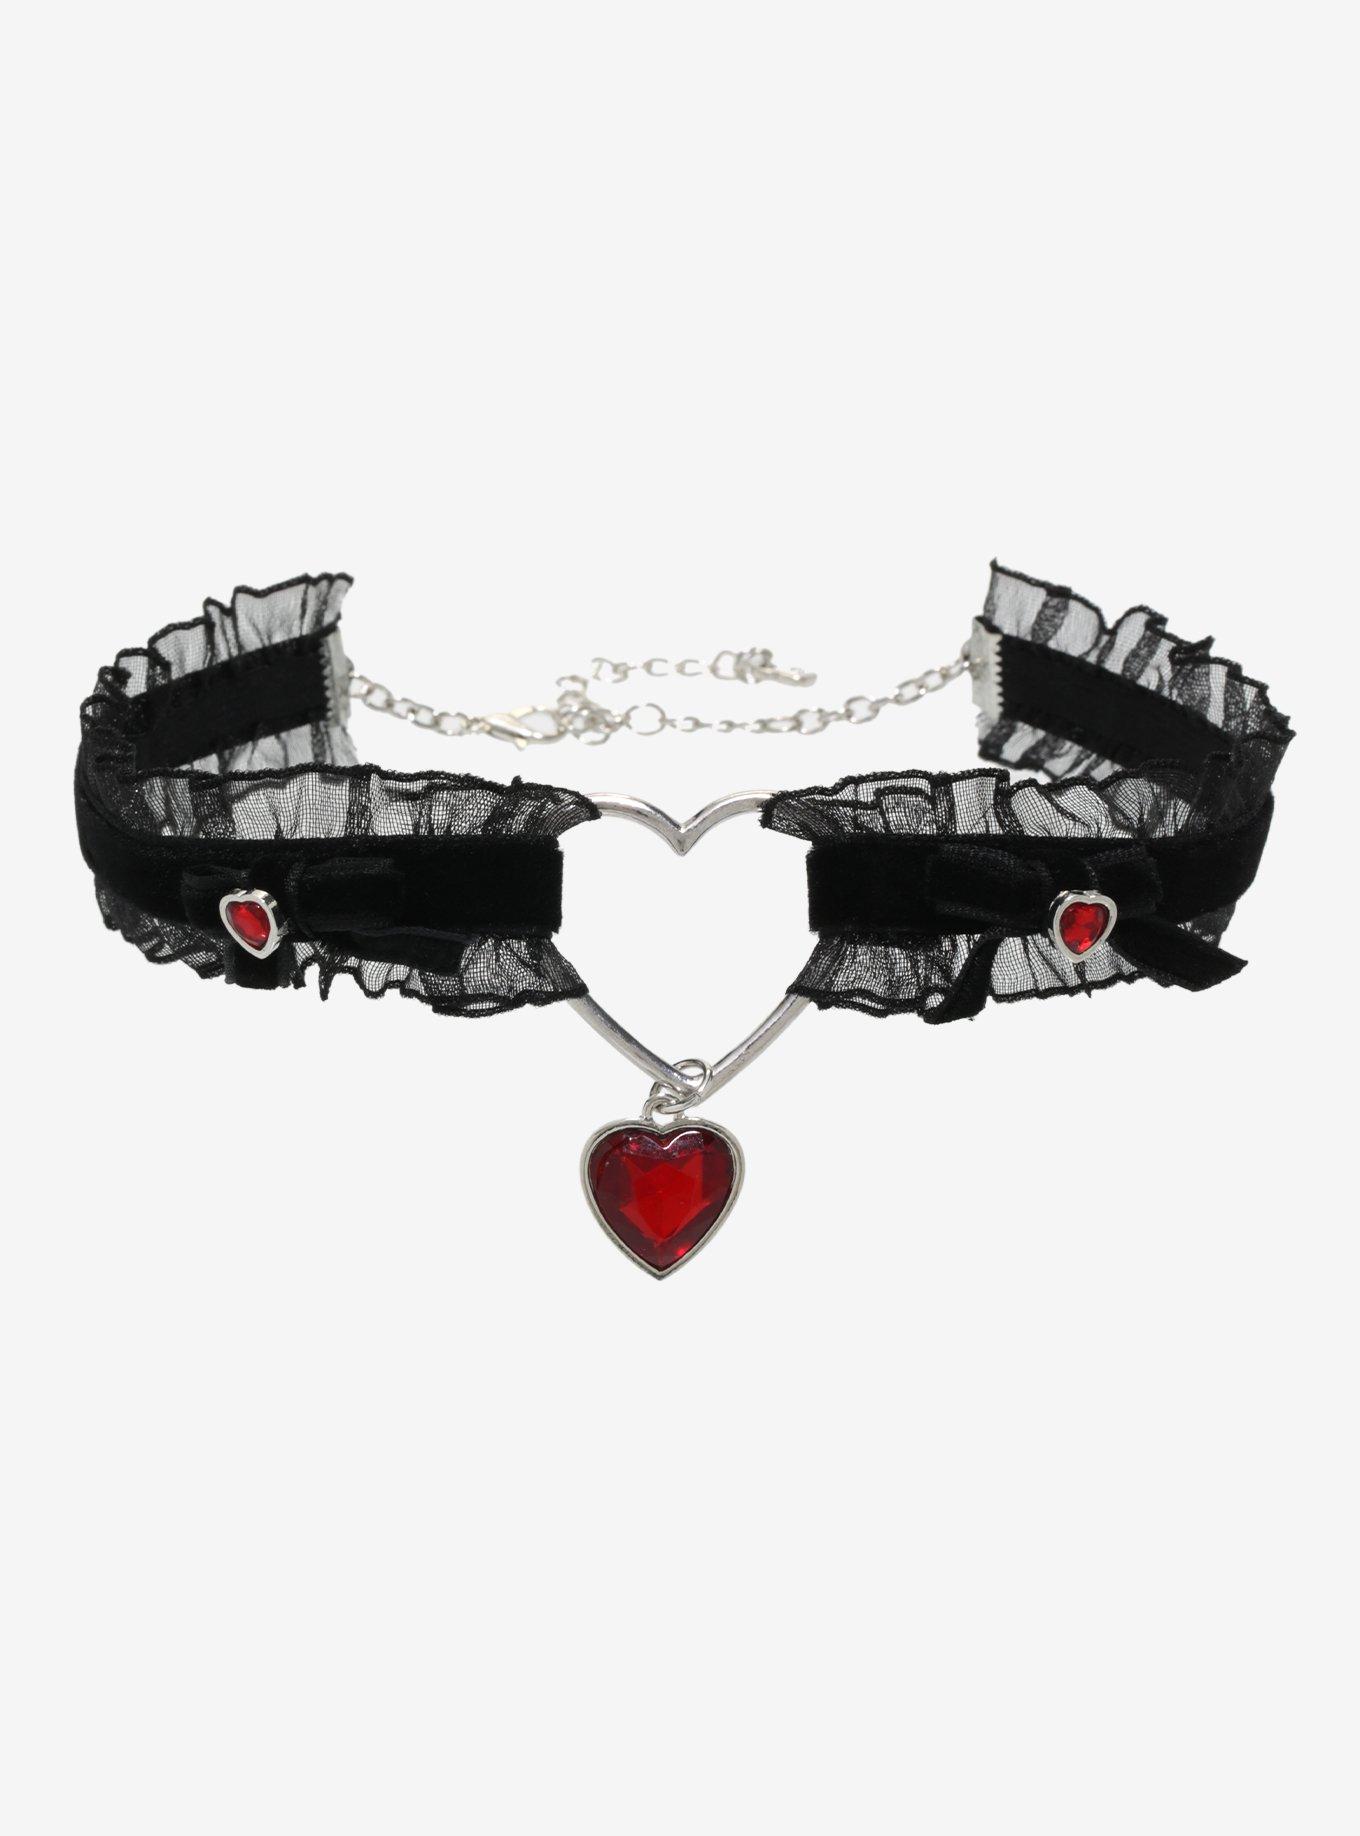 Cute Red Heart Necklace Temperament Fashion Sexy Women Choker Accessories  Clavicle Chain Jewelry Chokers Drop Ship From Harrypotter_jewelry, $0.47